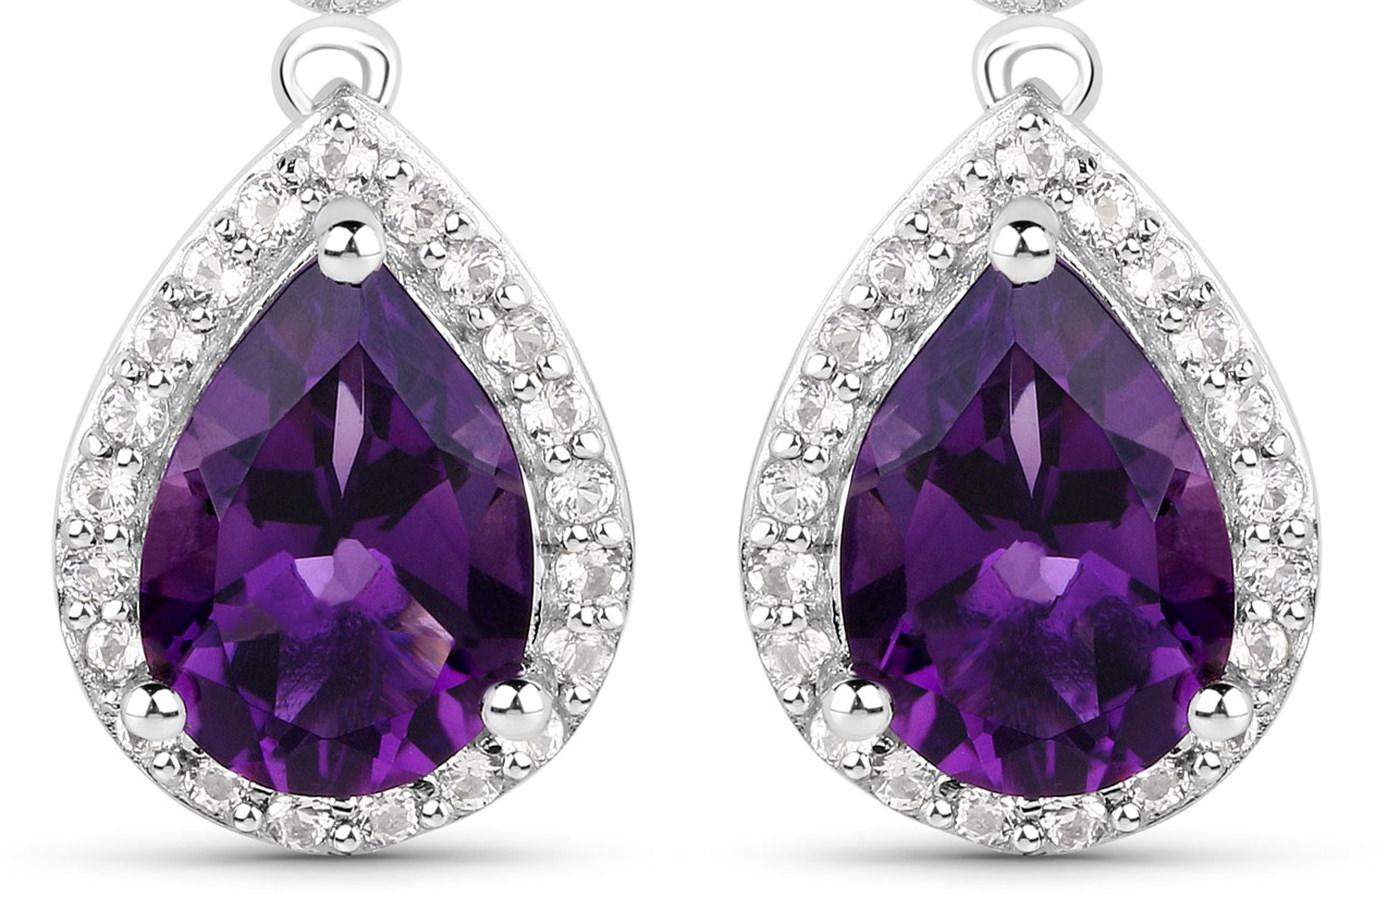 Contemporary Massive 7 Carats Amethyst and White Topaz Dangle Earrings 18k White Gold Plated For Sale